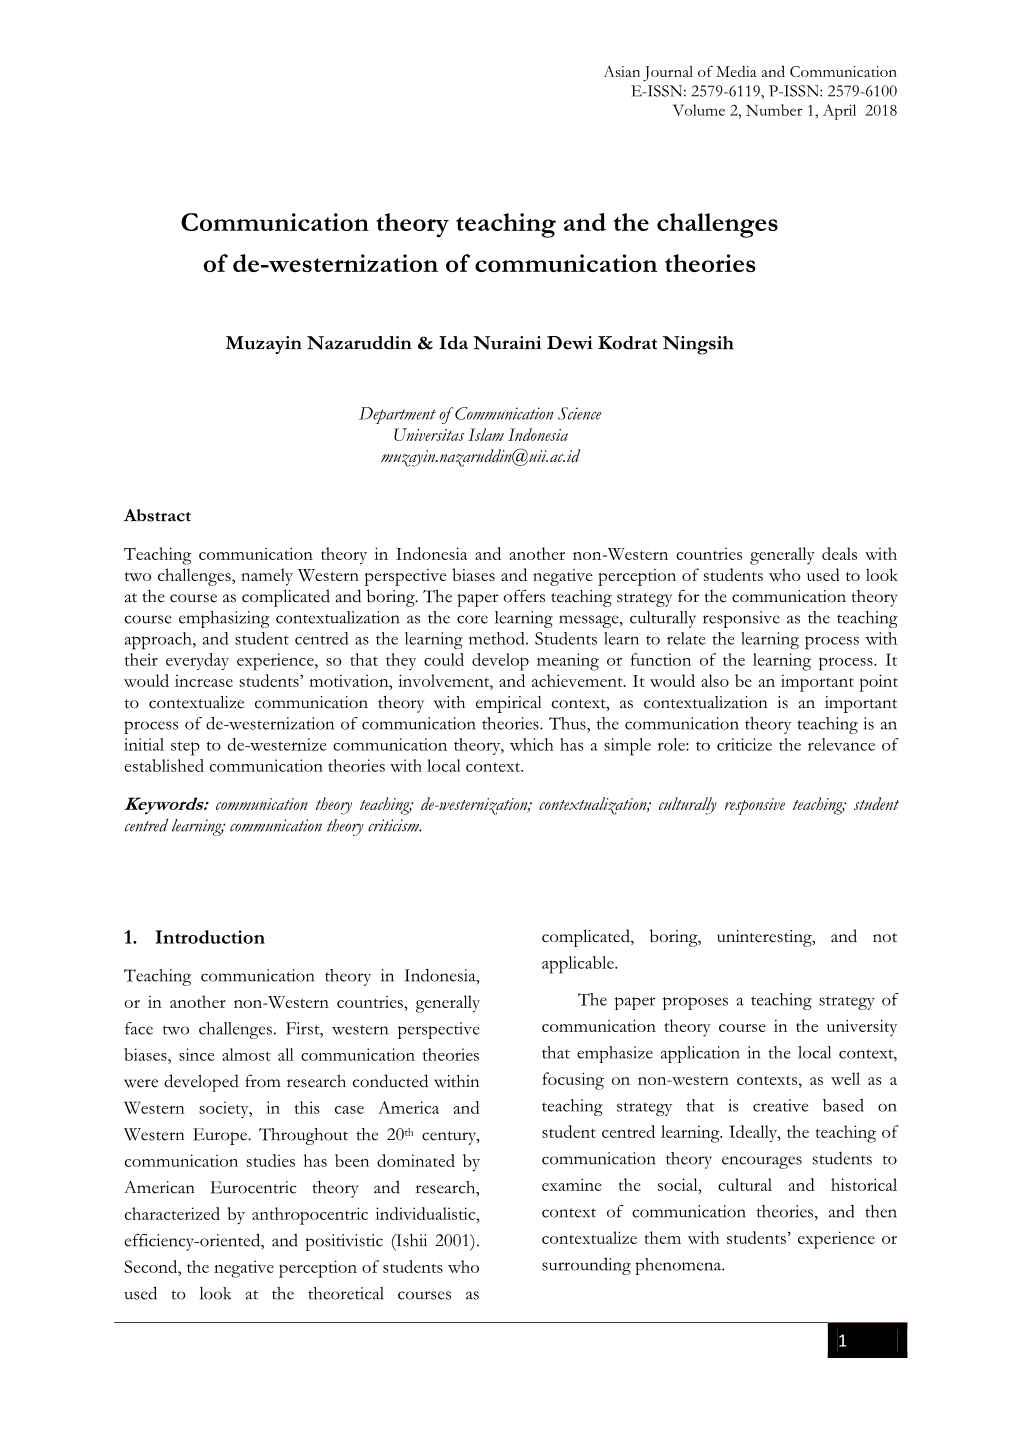 Communication Theory Teaching and the Challenges of De-Westernization of Communication Theories